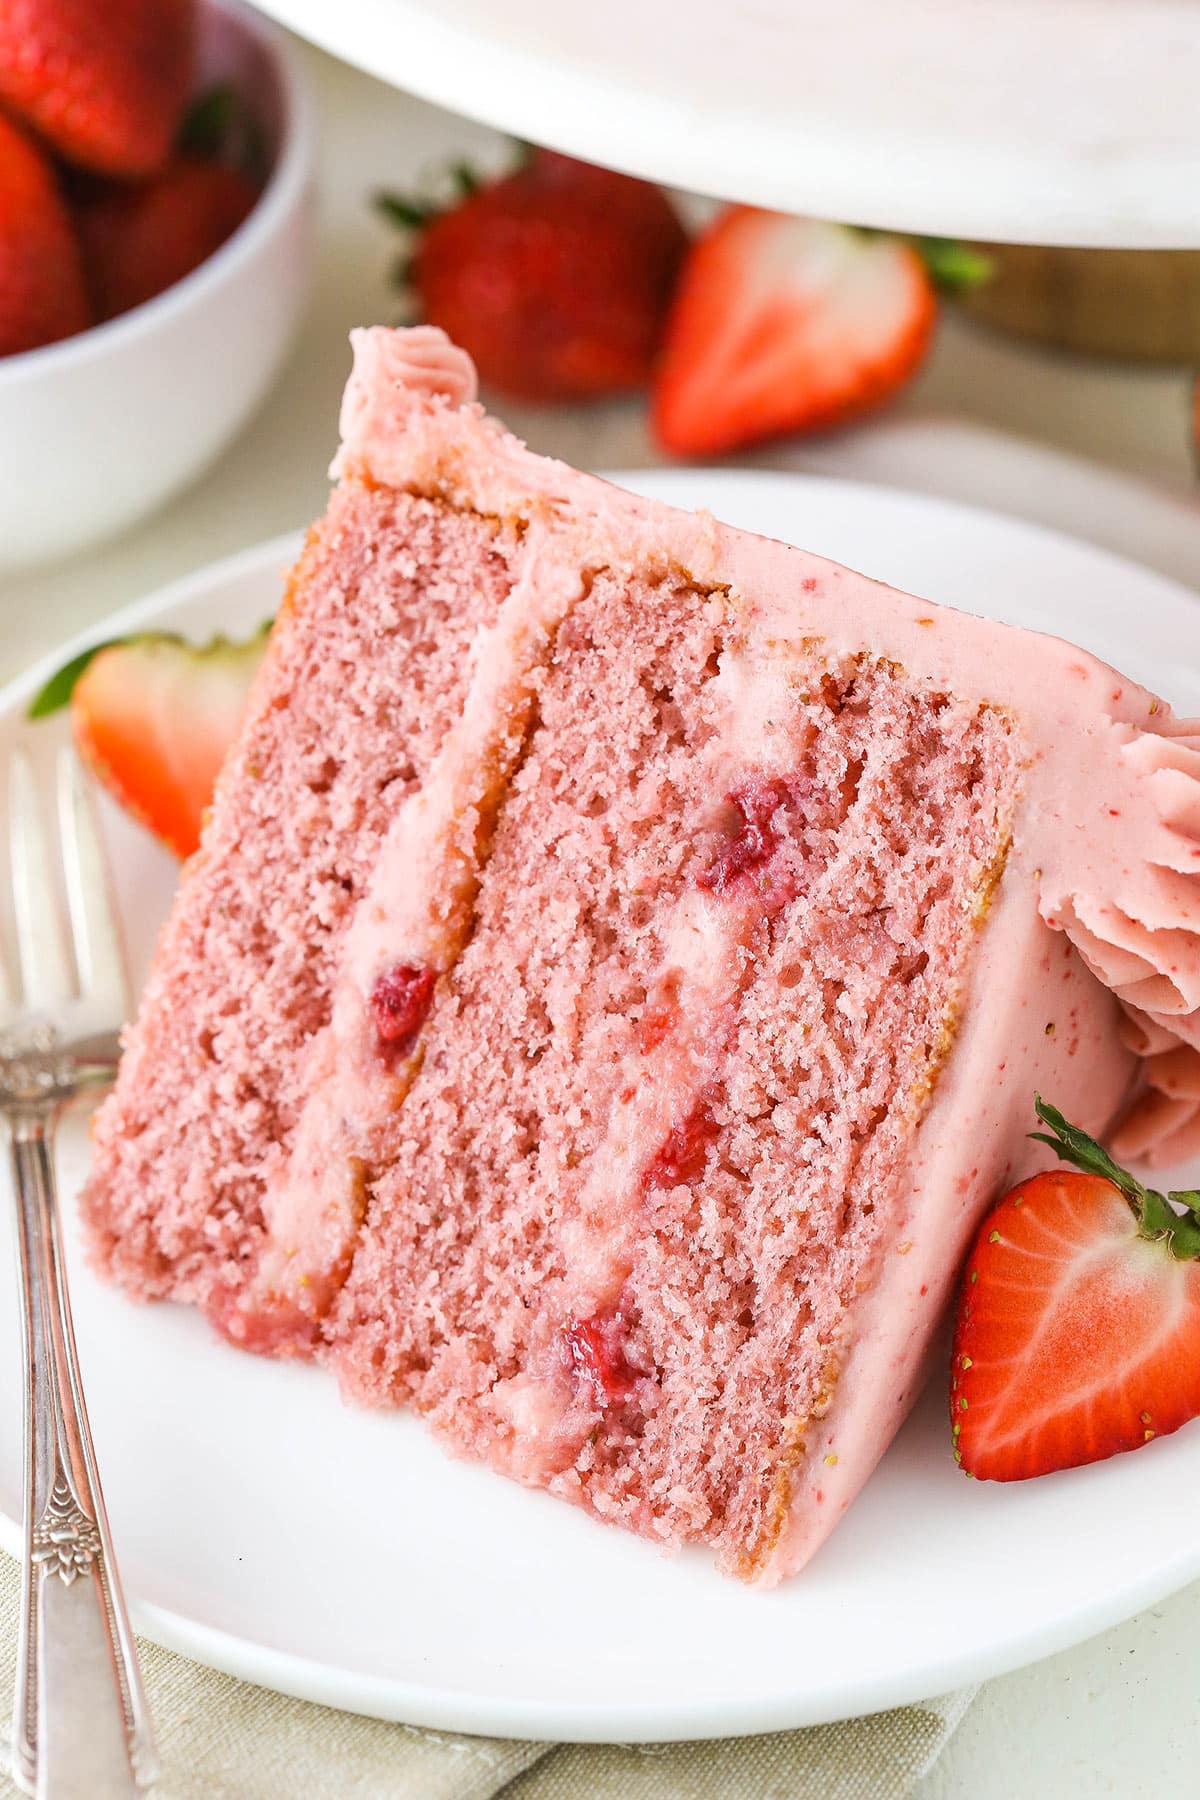 A slice of strawberry cake on a plate with a fork near fresh strawberries.